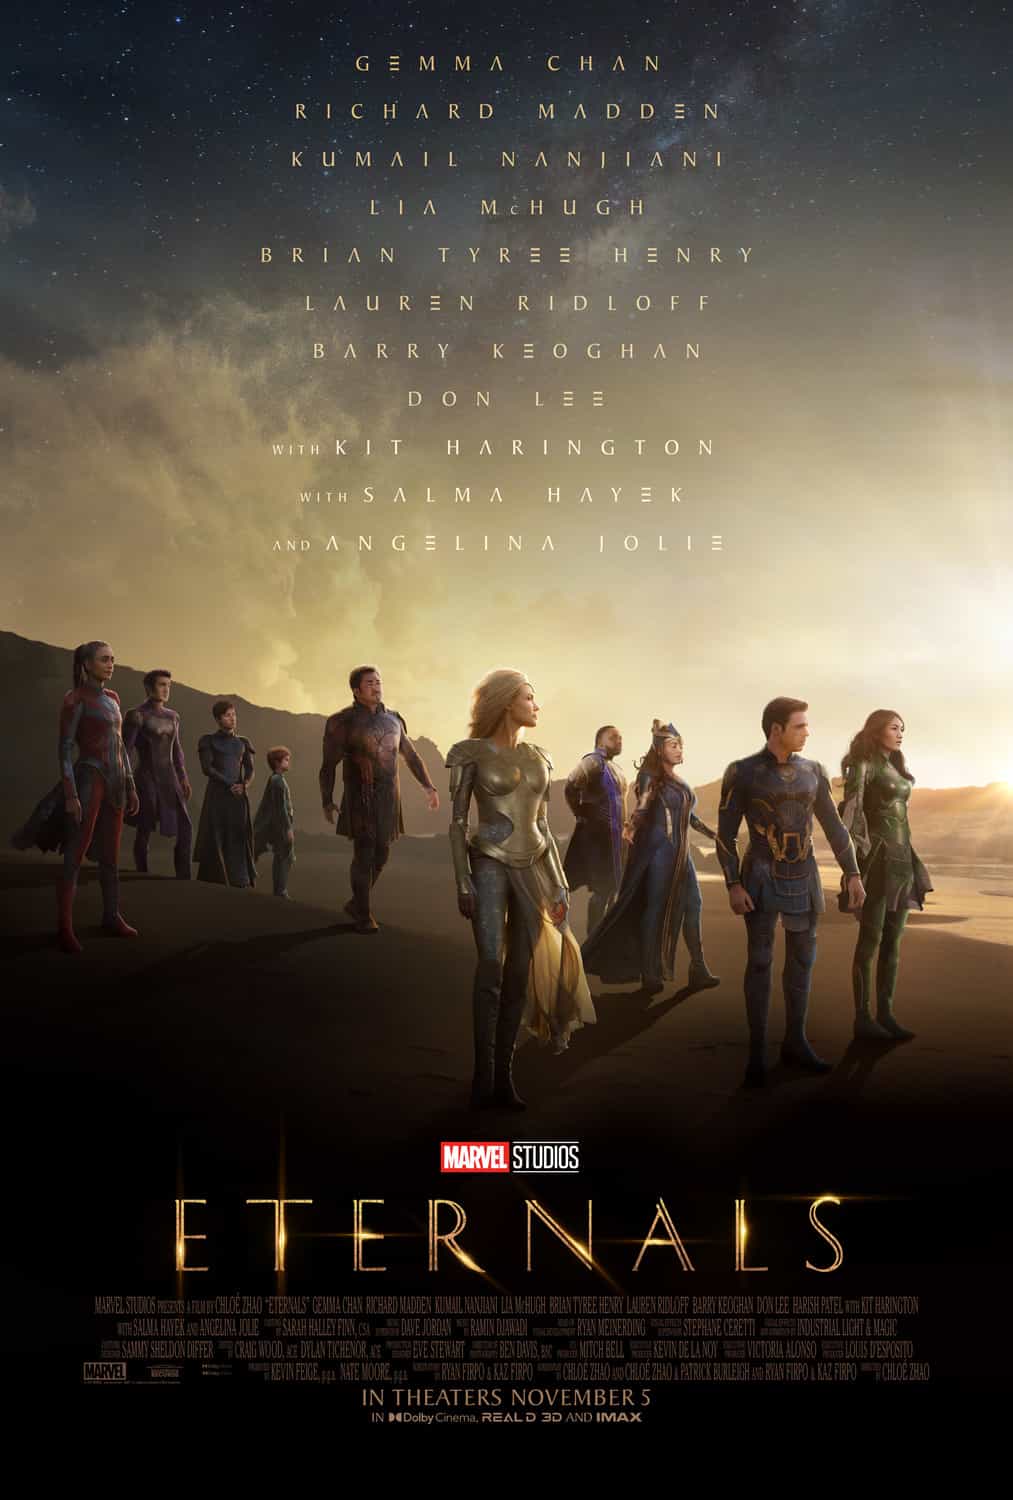 First trailer and poster released for Eternals starring Angelina Jolie - movie release date 5th November 2021